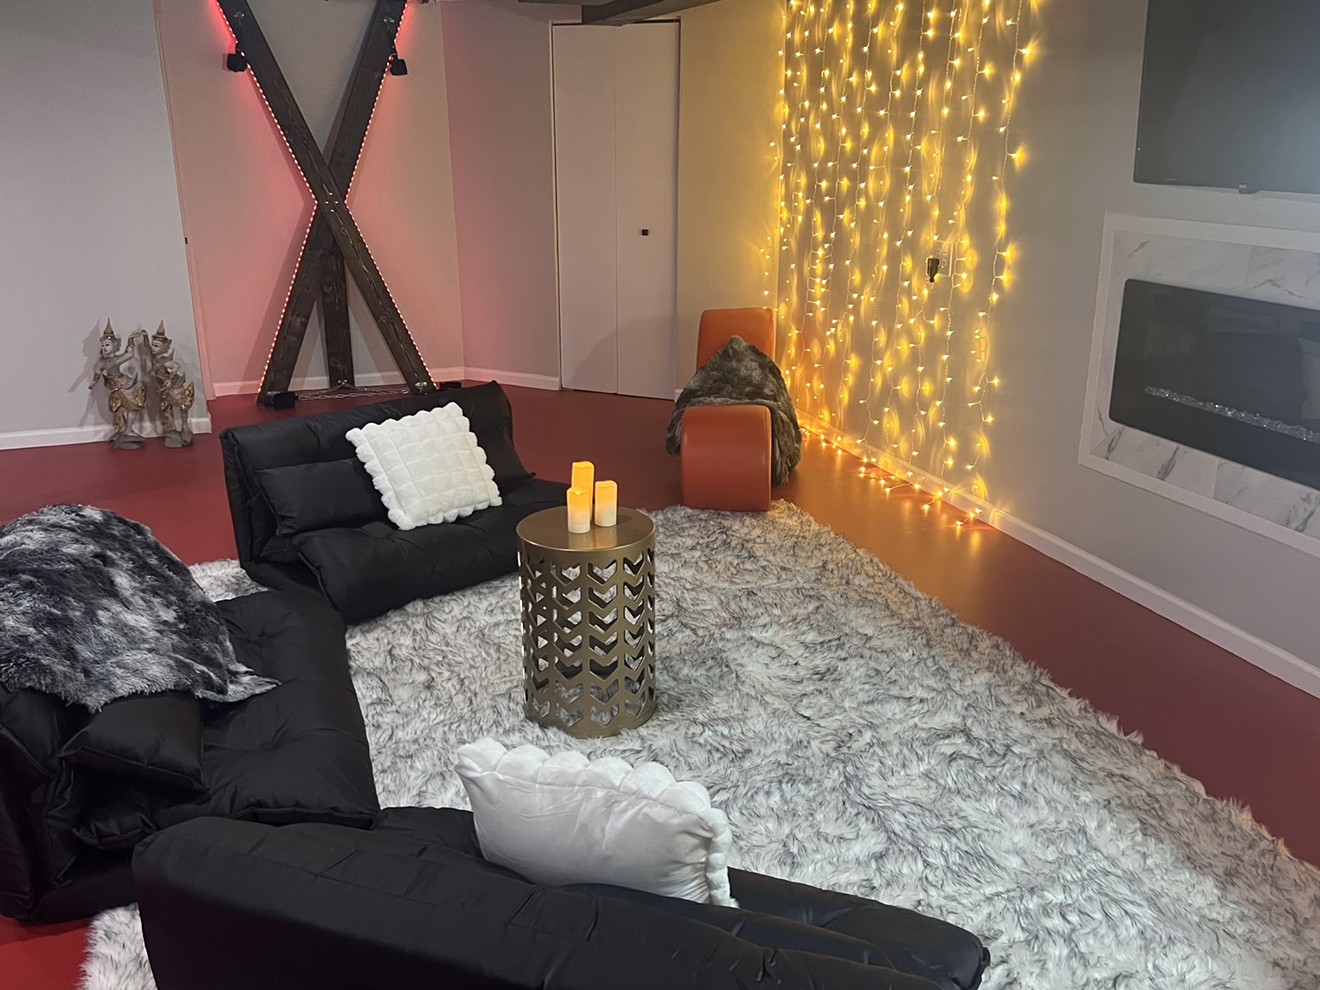 A room in Chicago that was recently designed and built by Fantasy Suites.